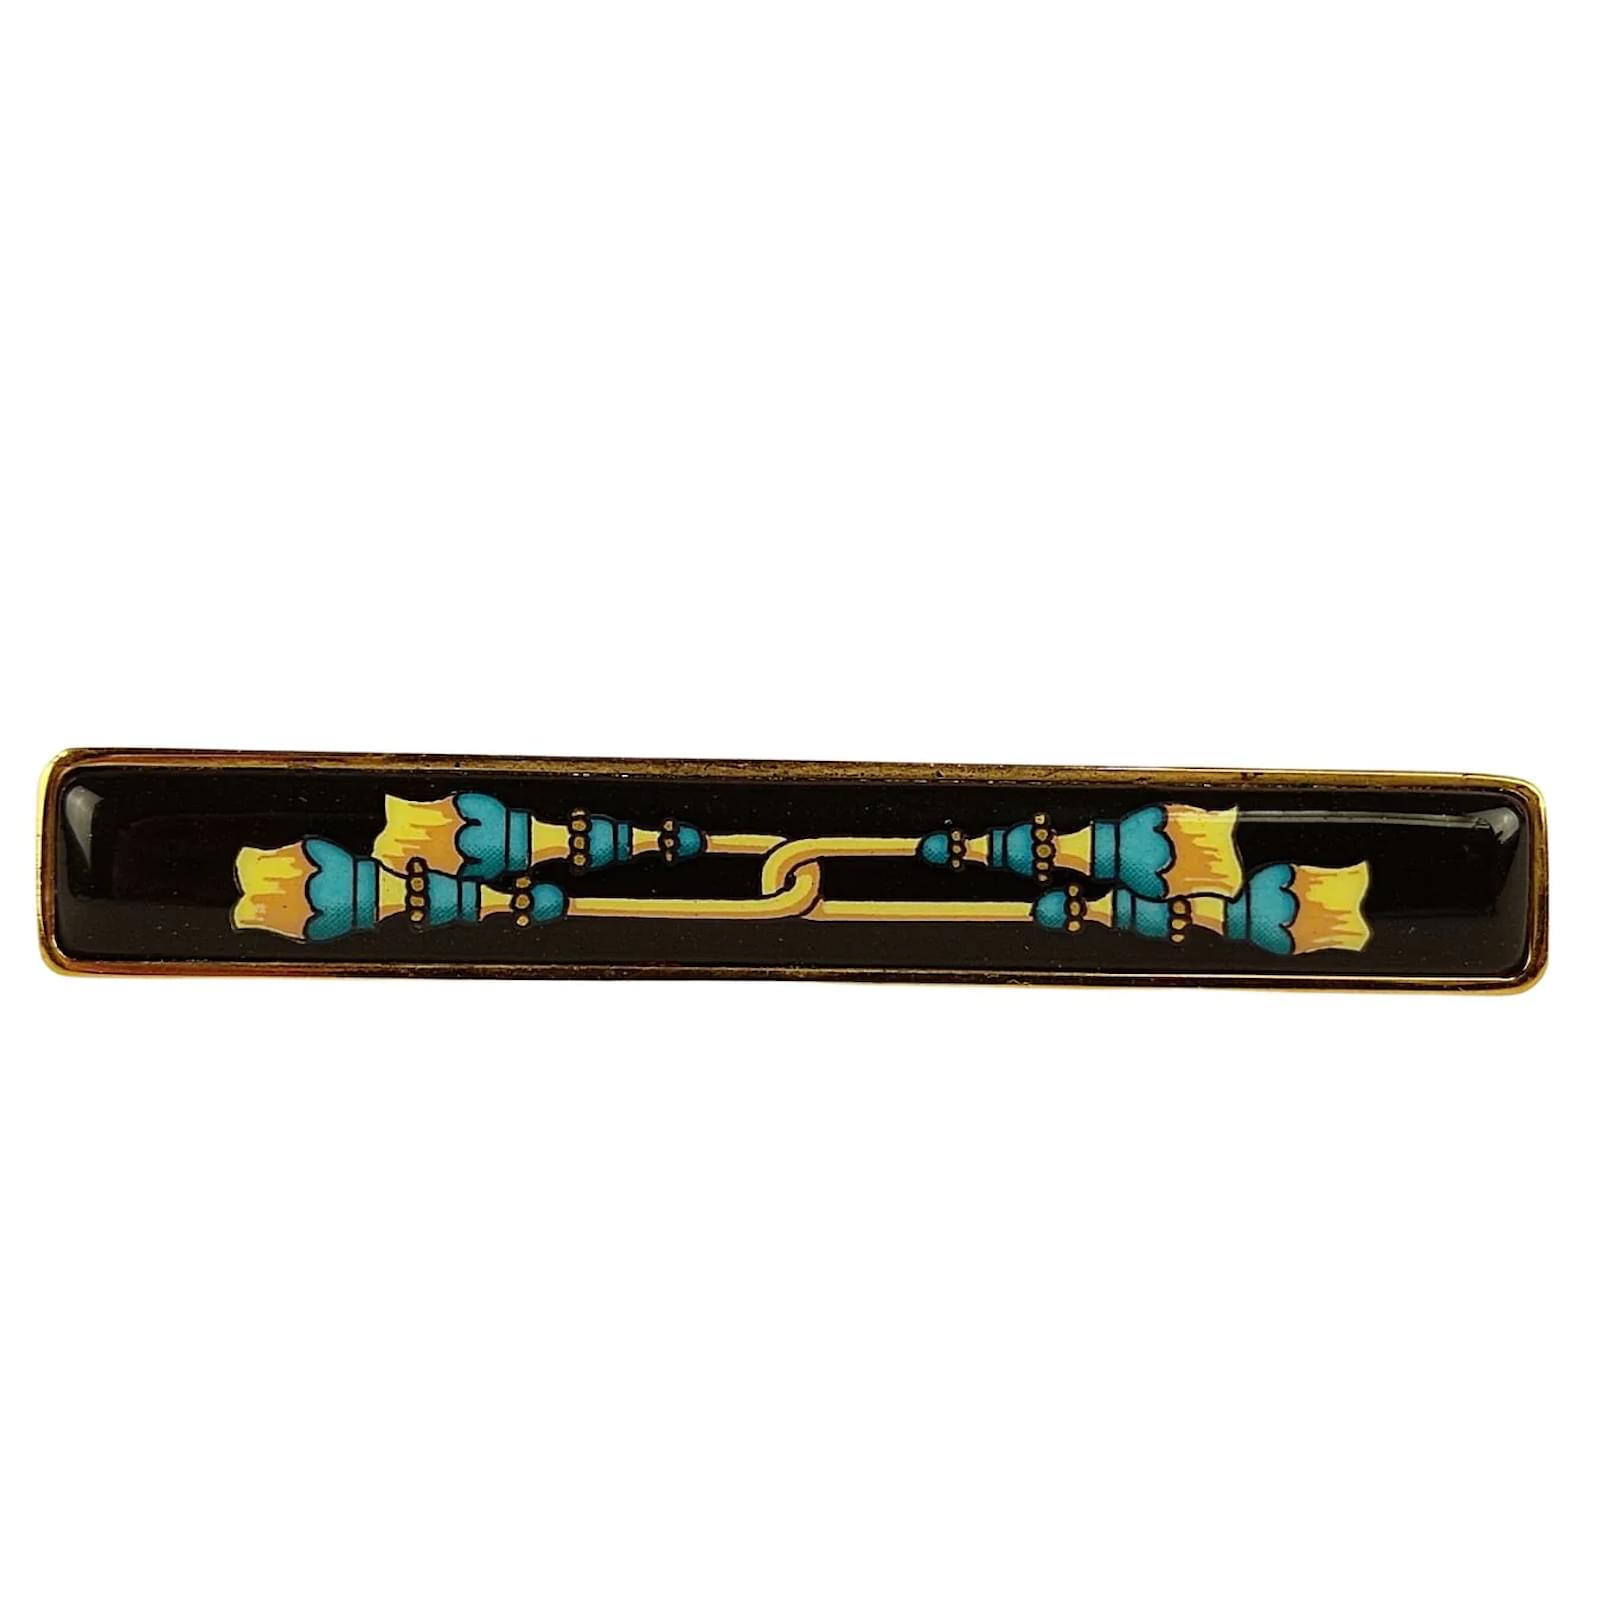 Hermès HERMES TIE CLIP IN GOLD PLATE AND BLACK ENAMEL GOLD PLATED